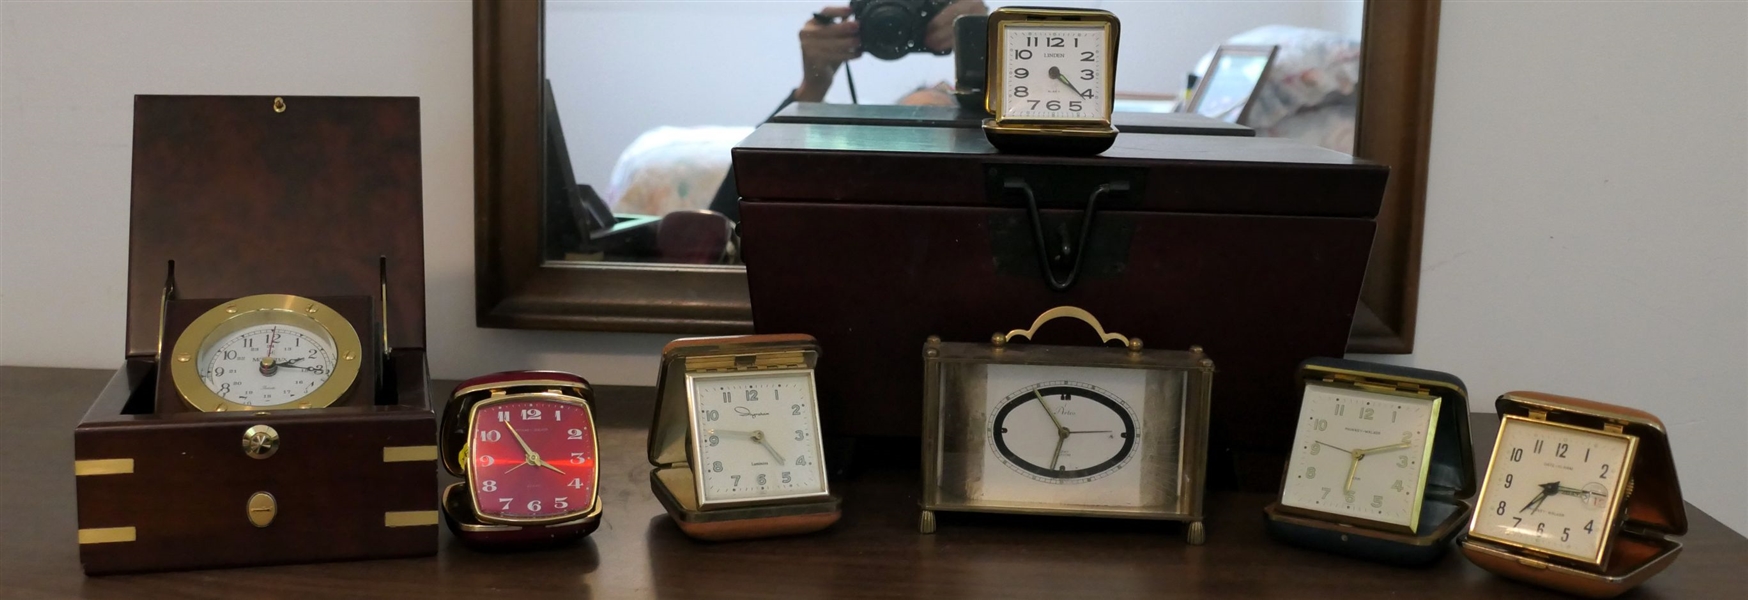 Collection of Desk and Travel Clocks and Wood Box - Travel Clocks include Red Phinney Walker Alarm, Ingraham Luminos, Phinney Walker Date, and Arlco - Box Measures 7" tall 13" by 8" 